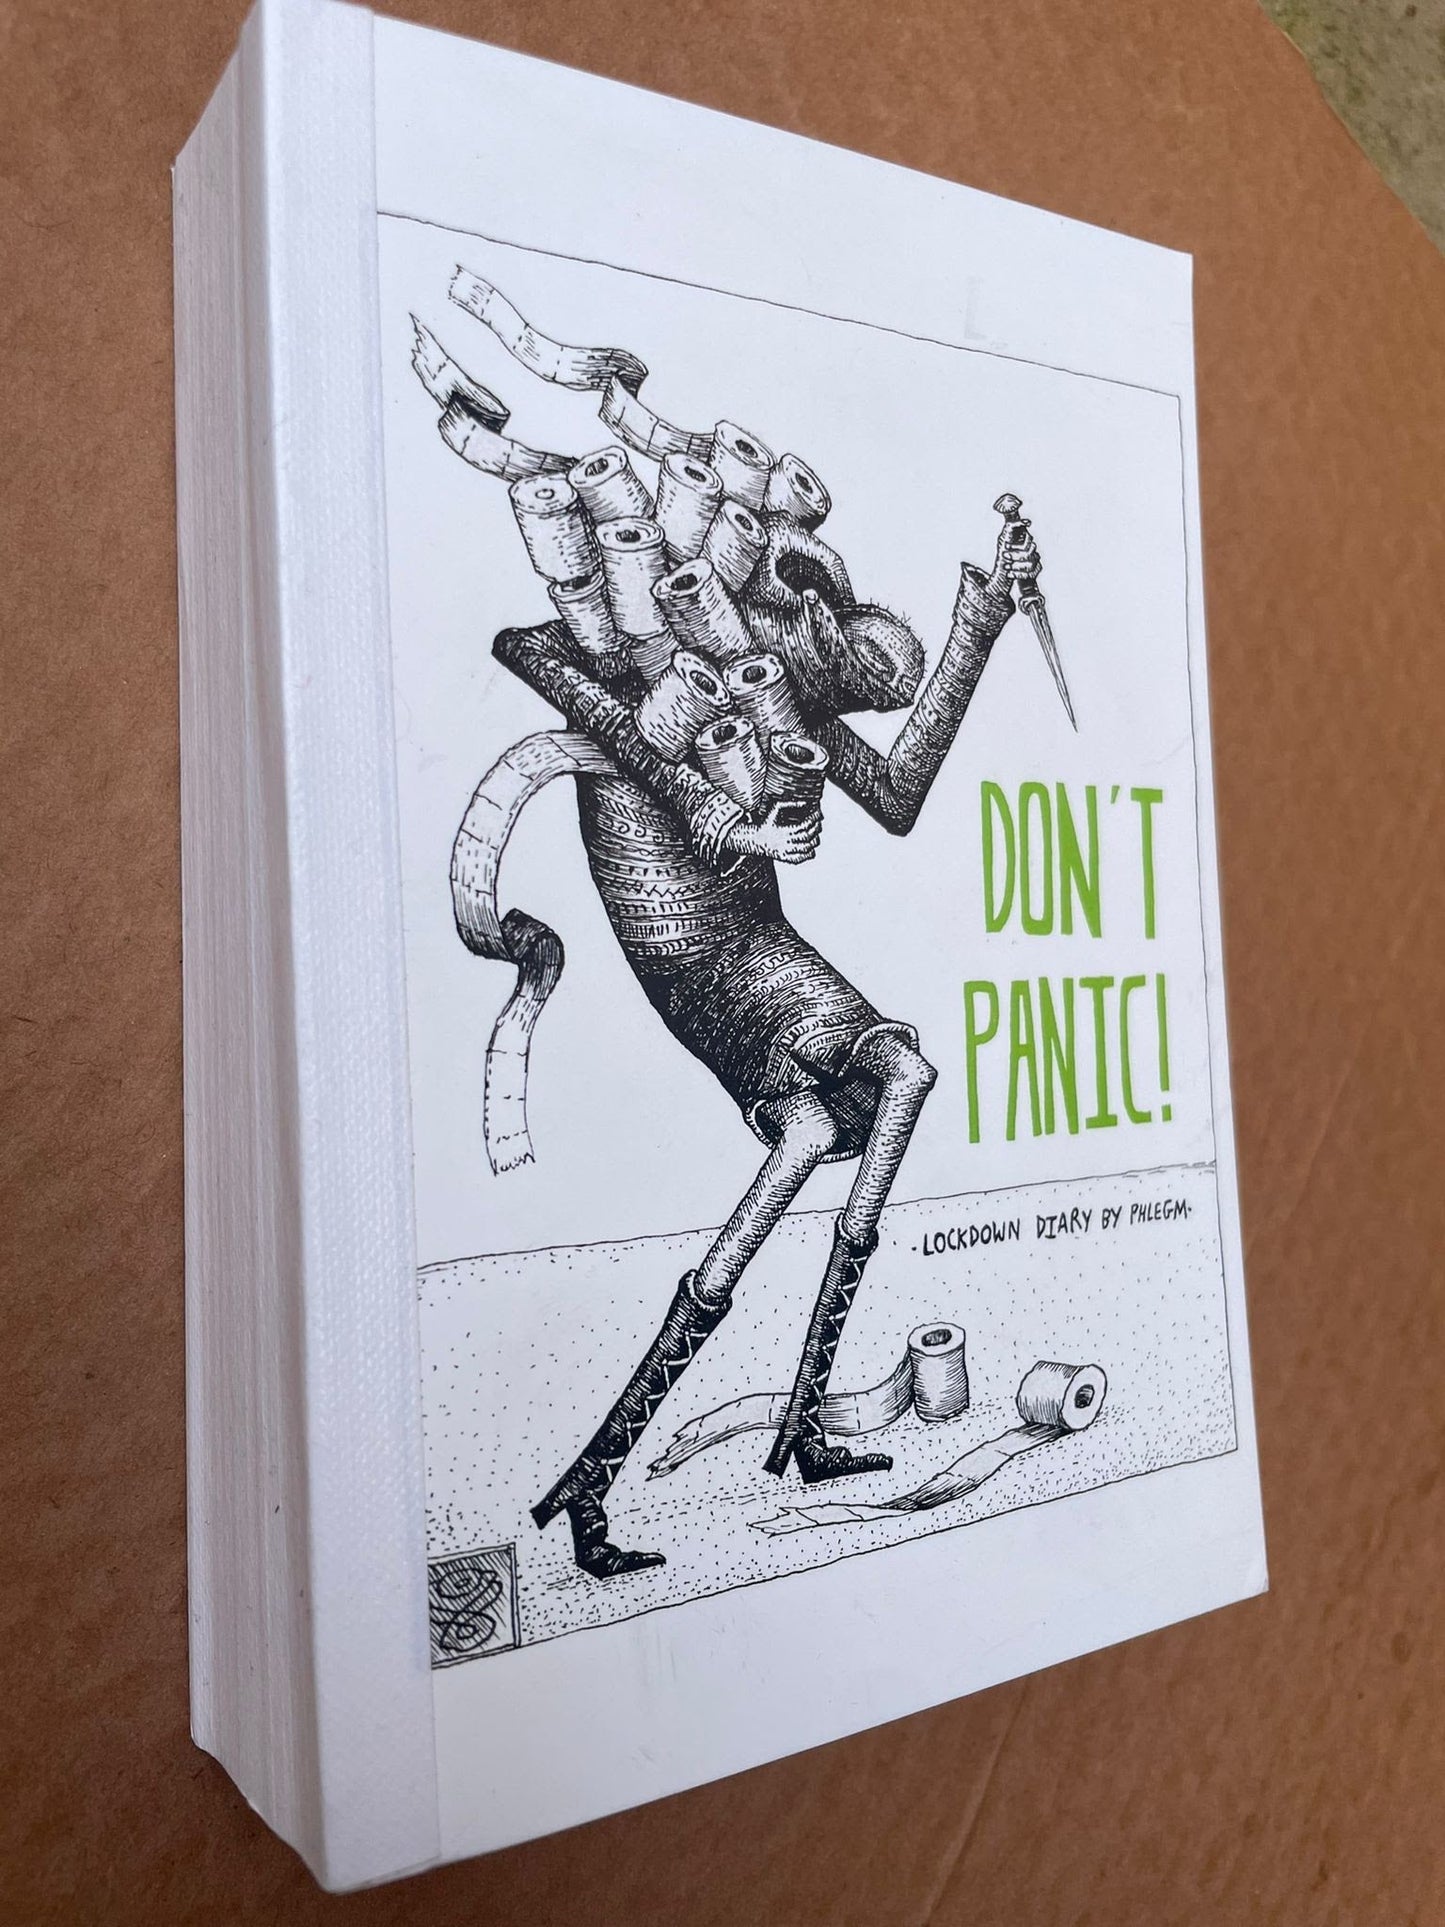 Don't Panic! Book & "Trapped" Mini Print (LOTTERY ENTRY)